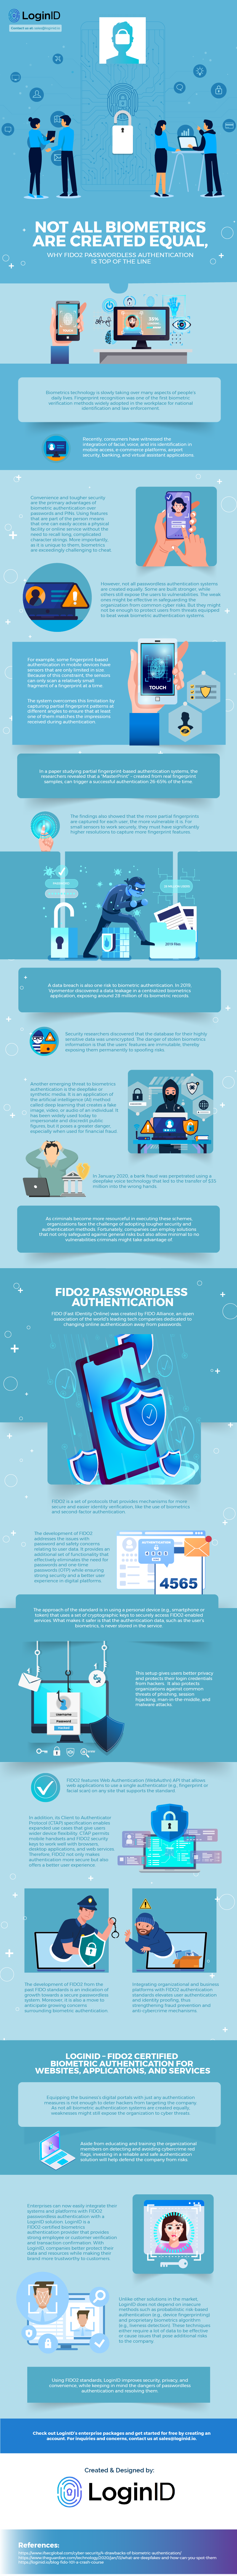 Not All Biometrics are Created Equal, Why FIDO2 Passwordless Authentication is Top of the Line_infographicimageuIDGn cS213